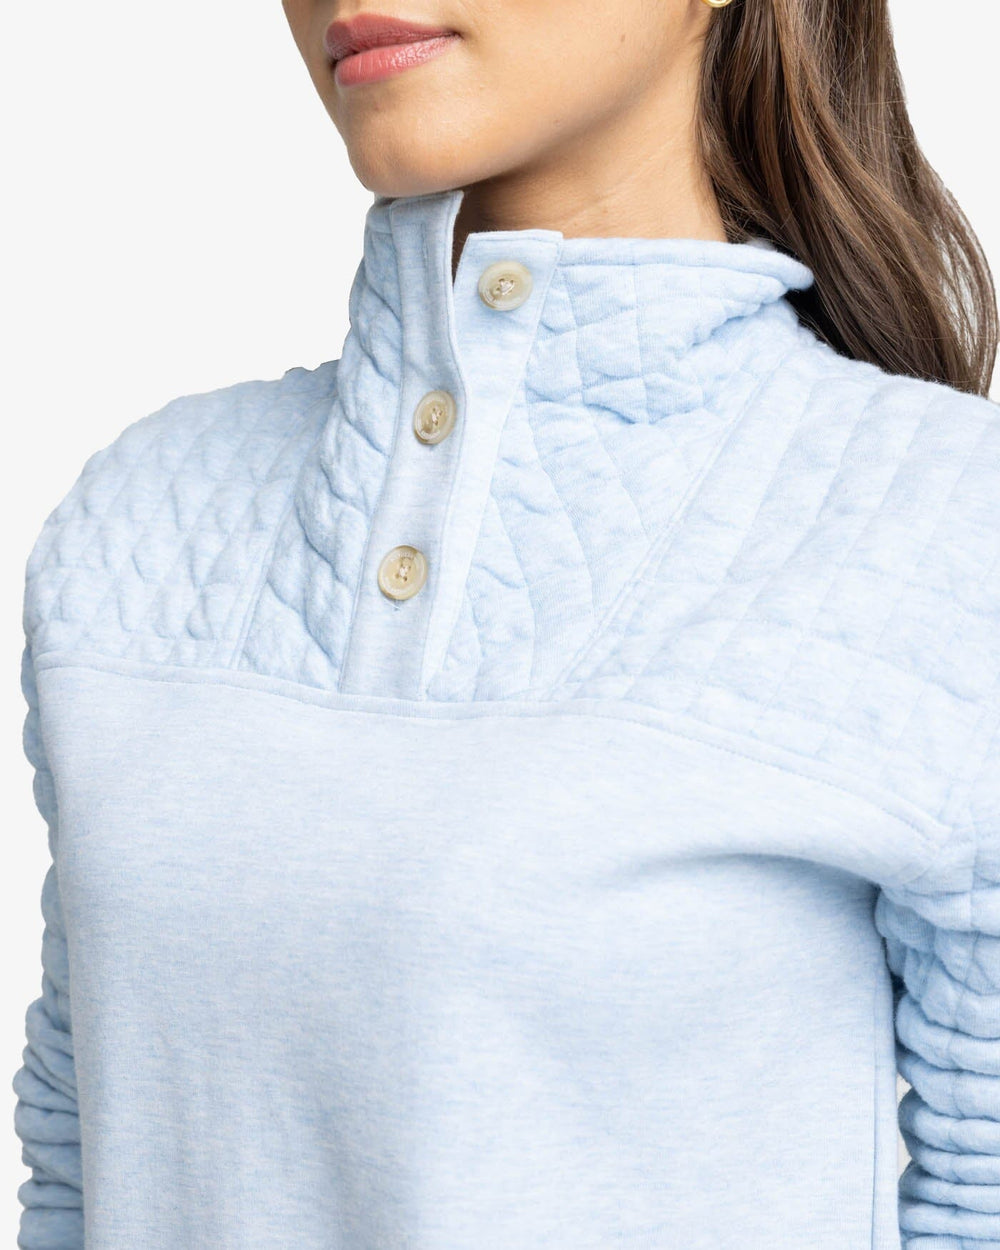 The detail view of the Southern Tide Kelsea Quilted Heather Pullover by Southern Tide - Heather Dream Blue